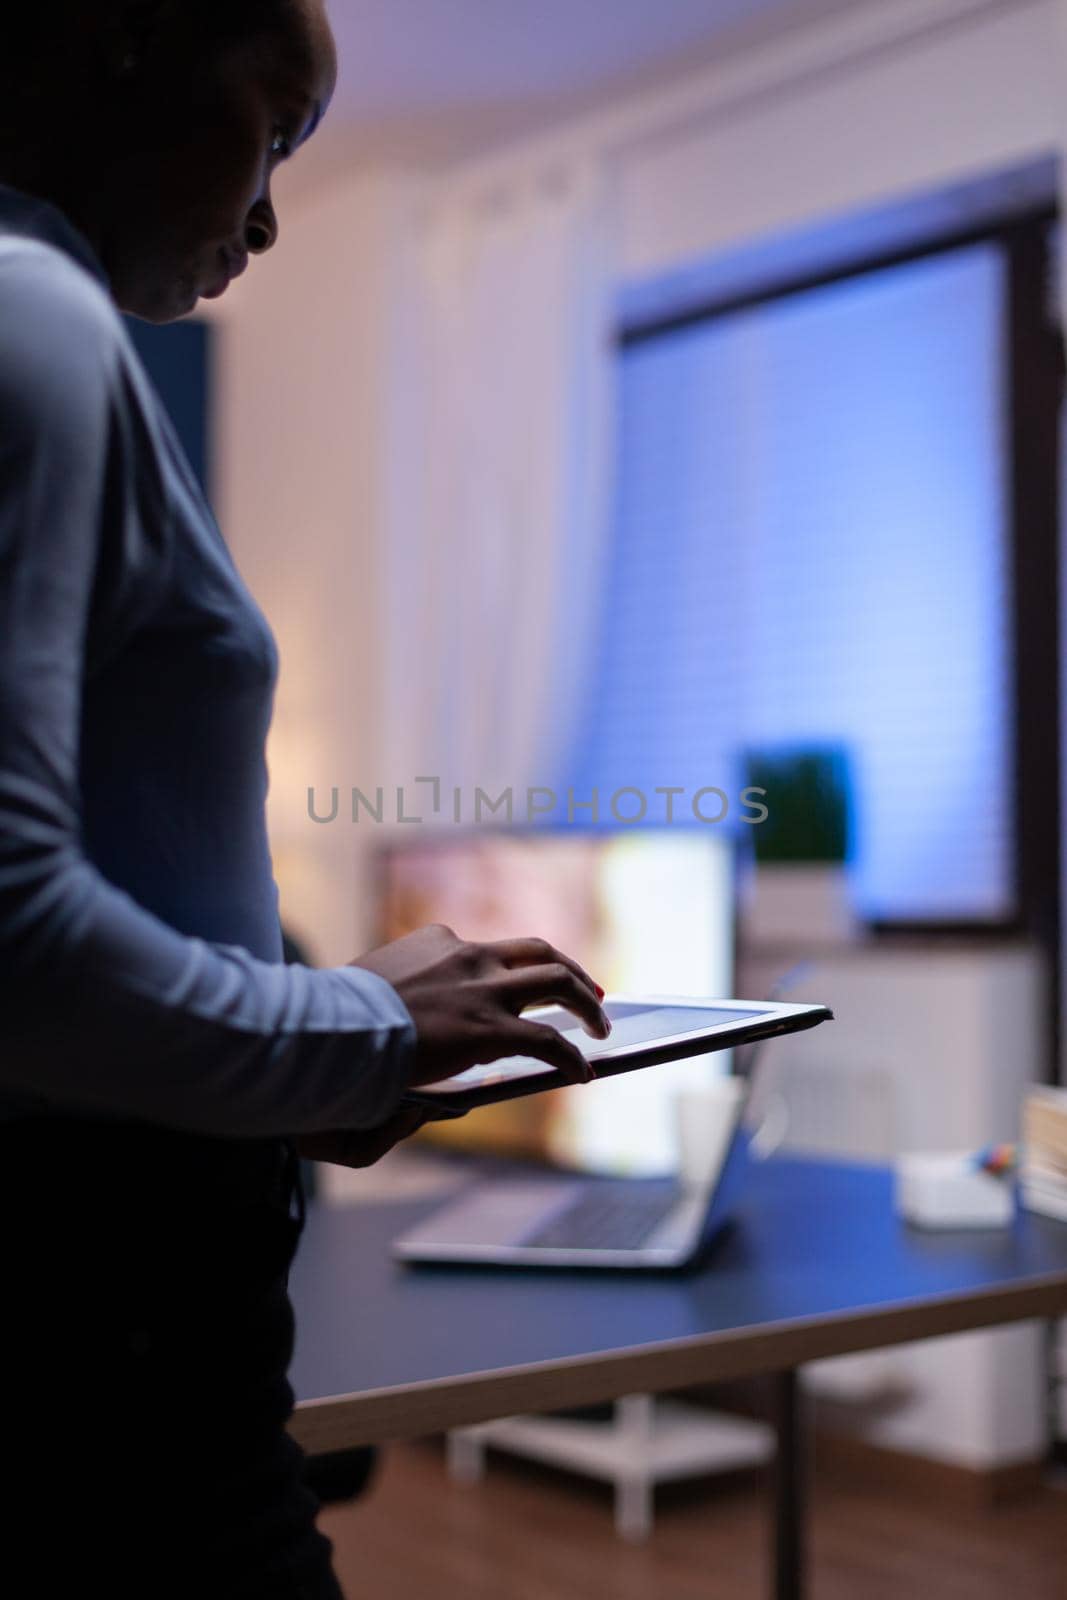 Dark skinned woman using tablet pc keybpad to write email working from home office. Busy focused employee using modern technology network wireless doing overtime writing.